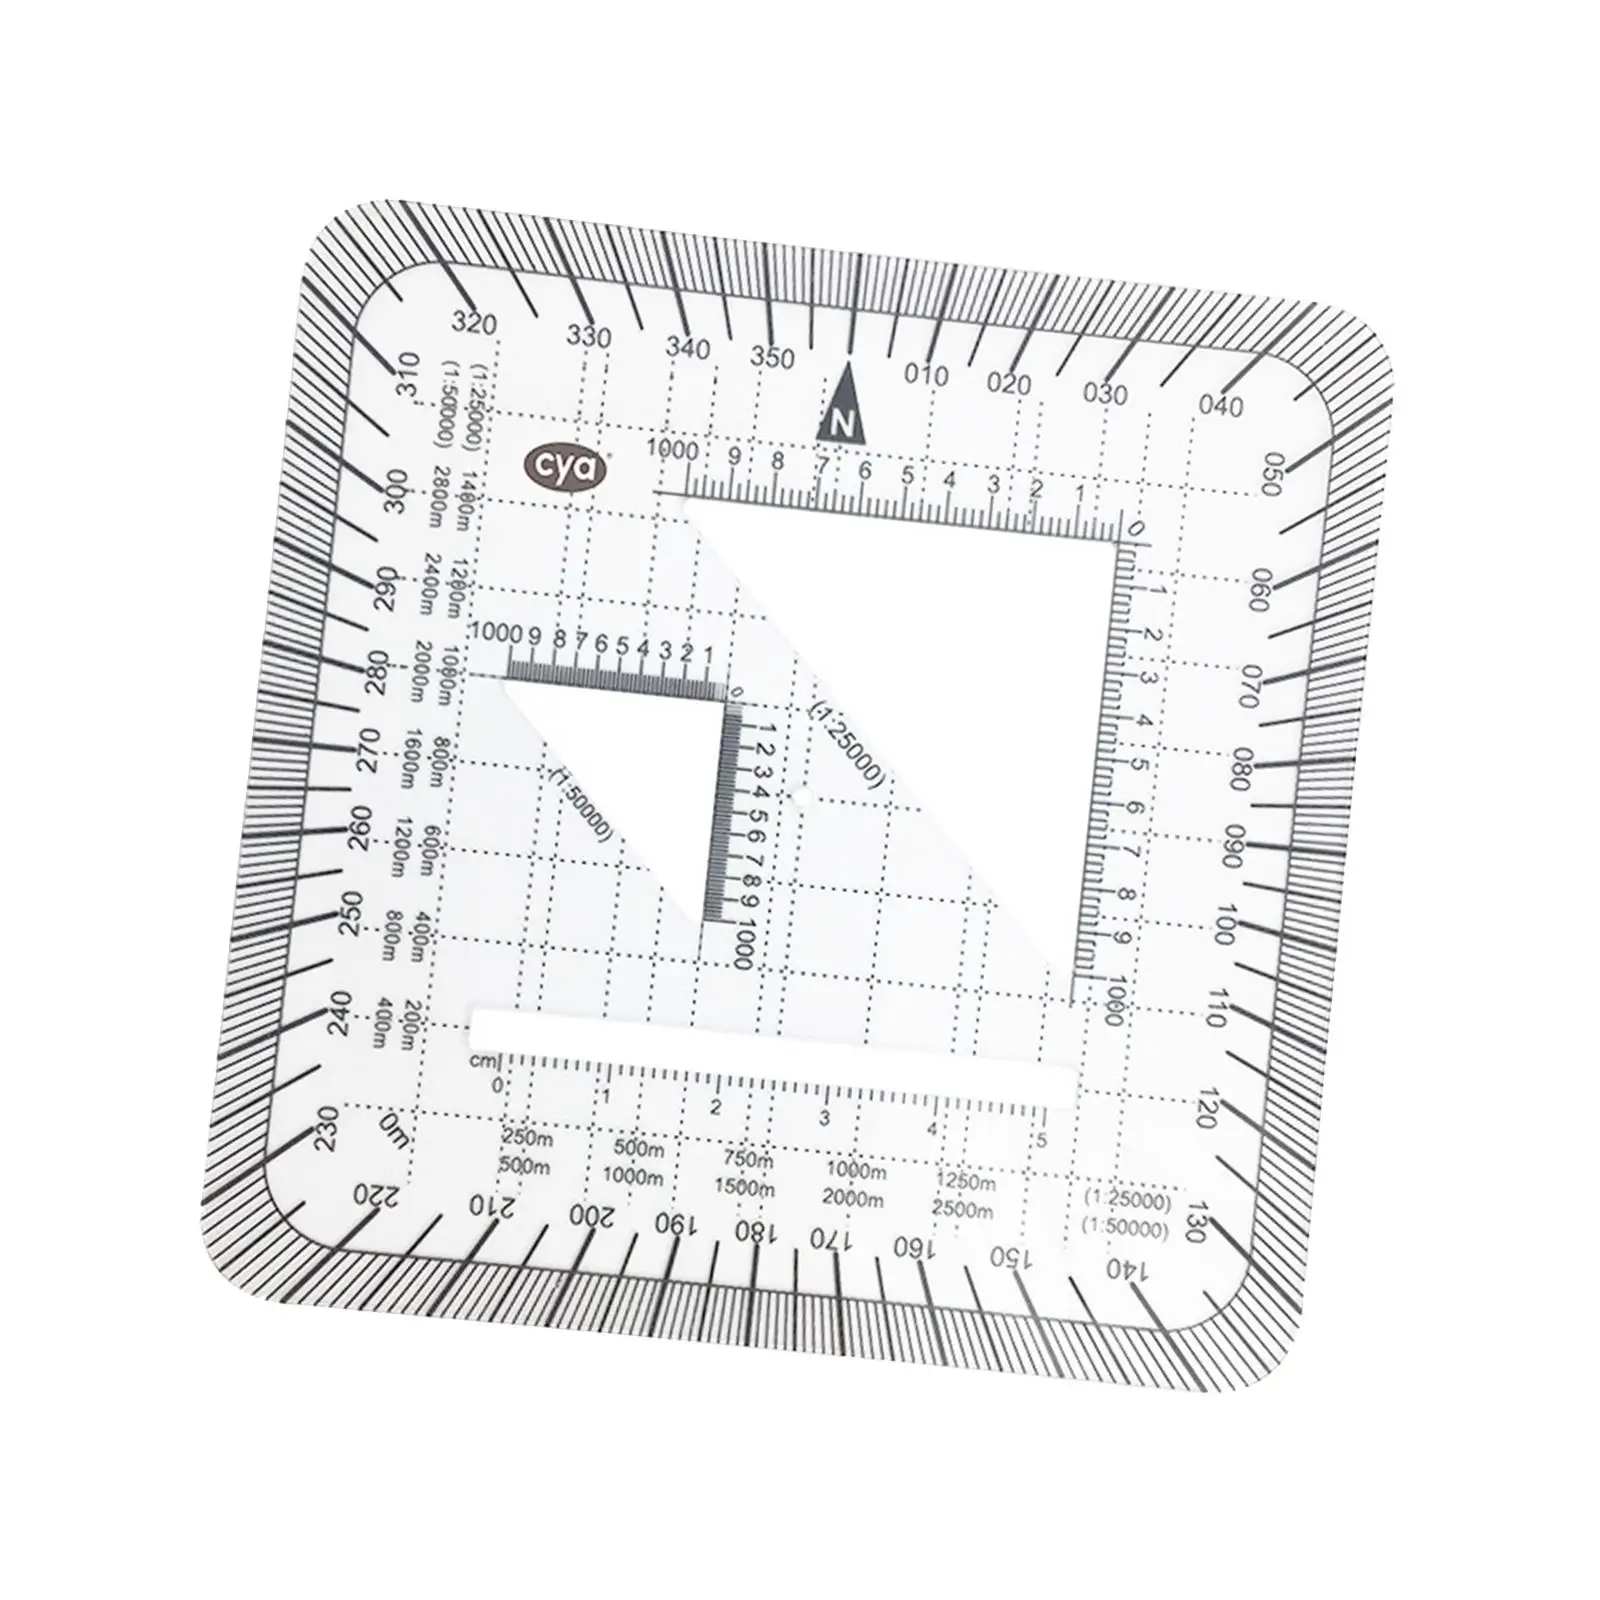 Protractor Ruler Square Acrylic Drawing Architecture Learning for Poltting Utm, Usng, Mgrs Coordinates Land Navigation Traveling